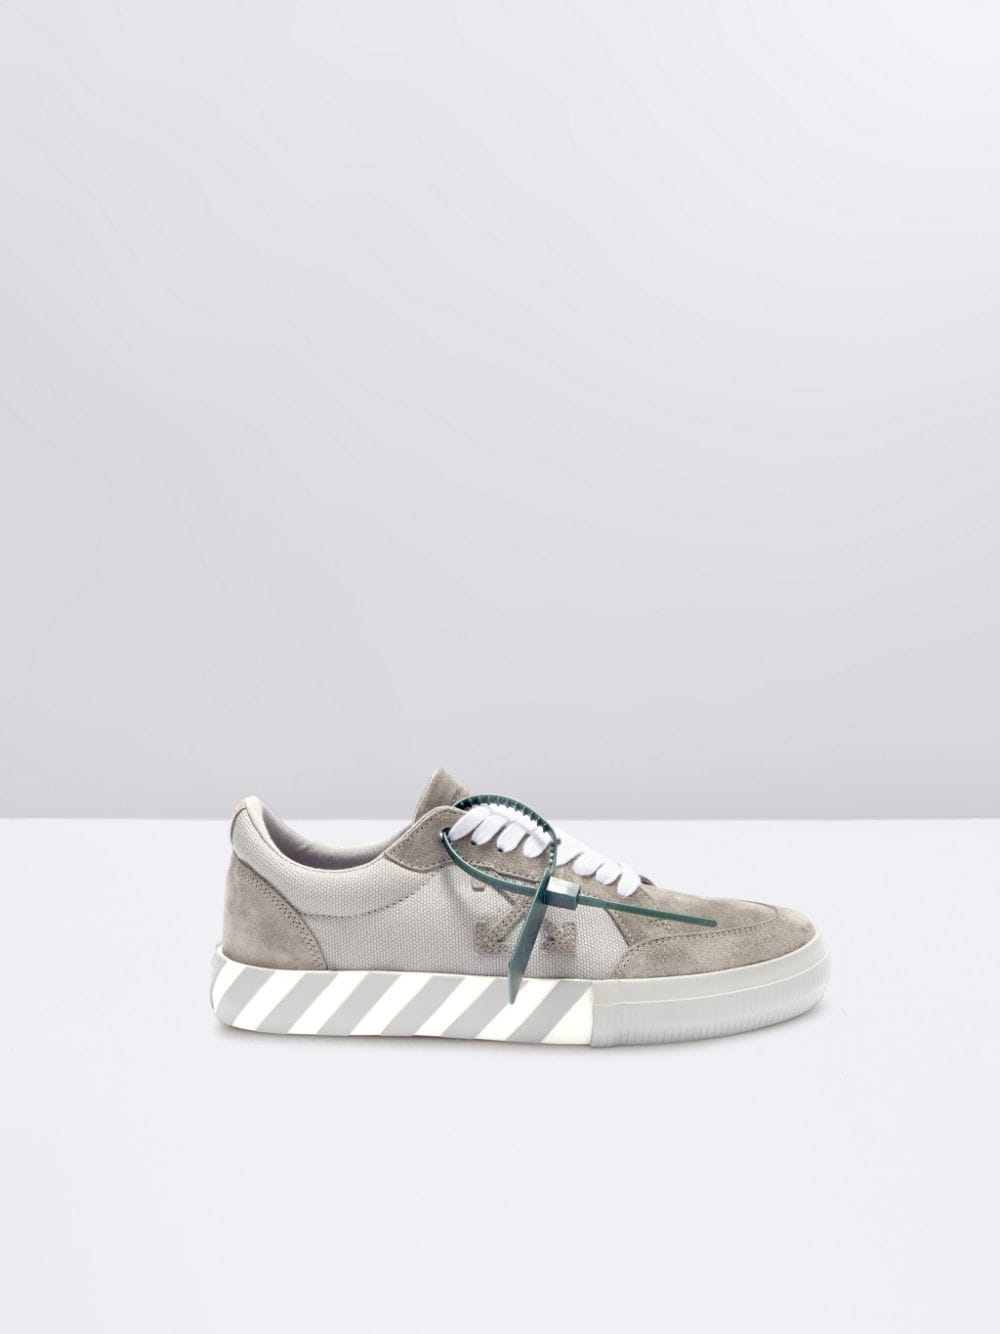 Off-White Vulcanized Canvas low-top Sneakers - Farfetch